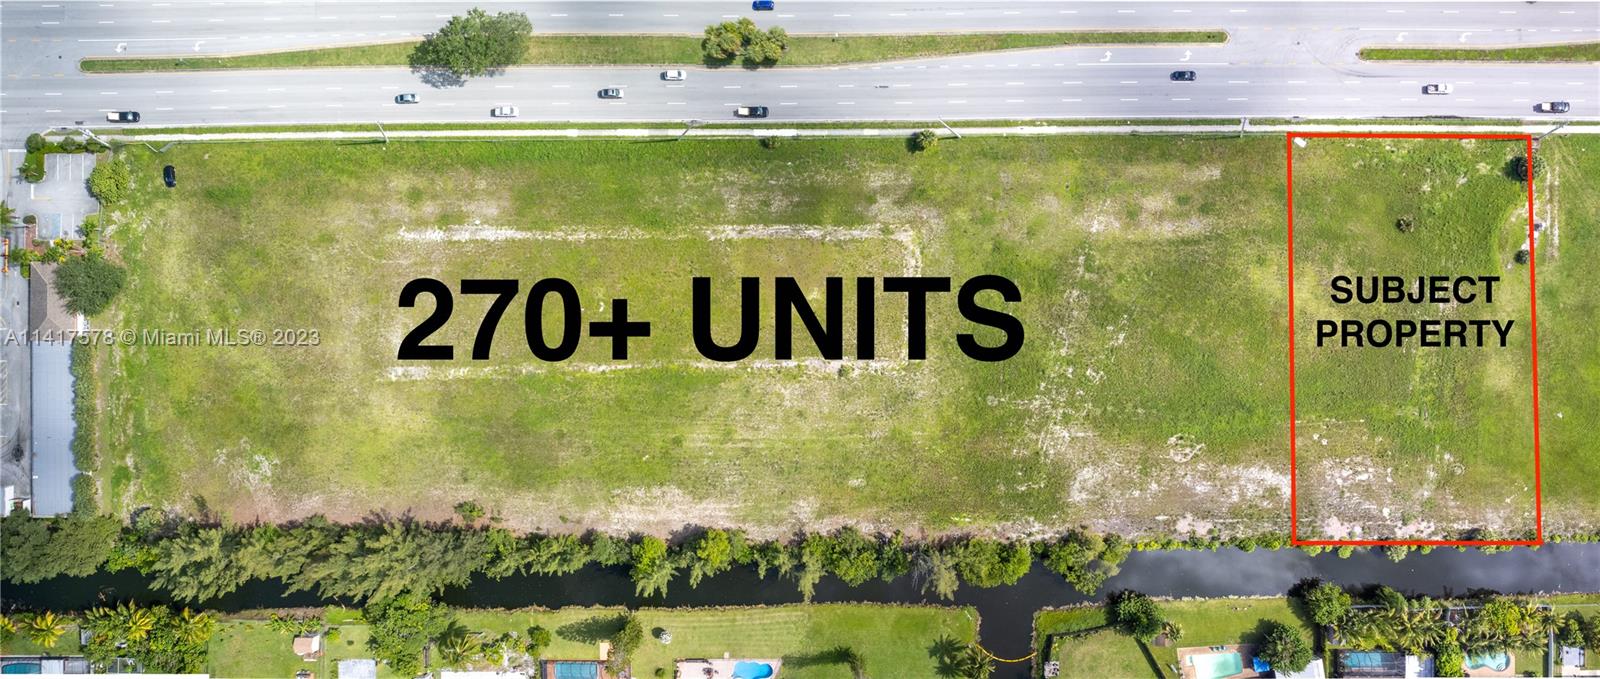 Property for Sale at Address Not Disclosed, Lauderhill, Miami-Dade County, Florida -  - $1,600,000